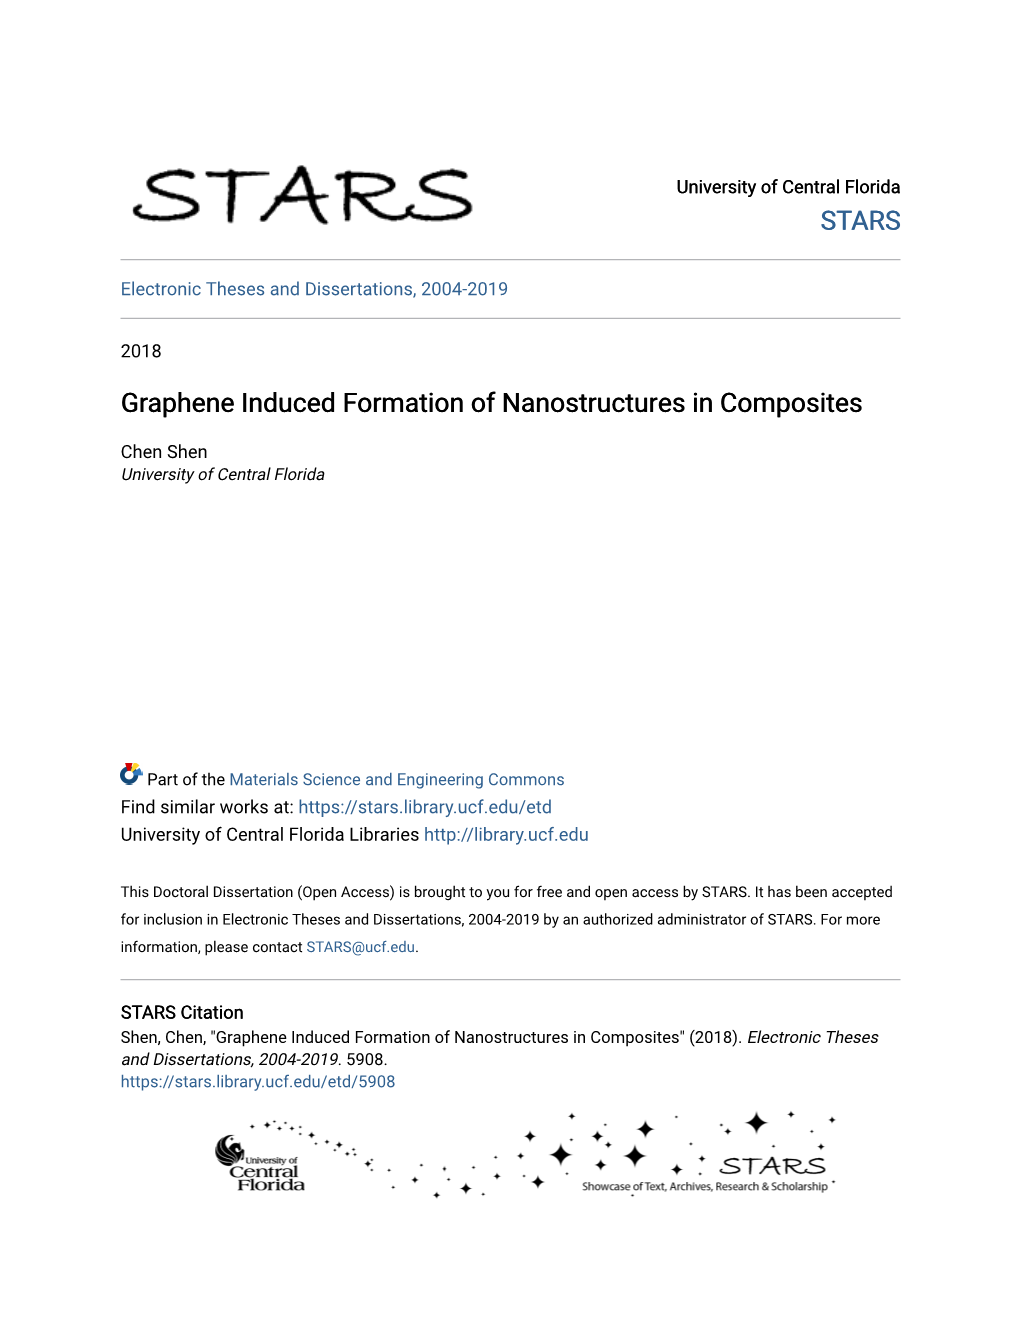 Graphene Induced Formation of Nanostructures in Composites